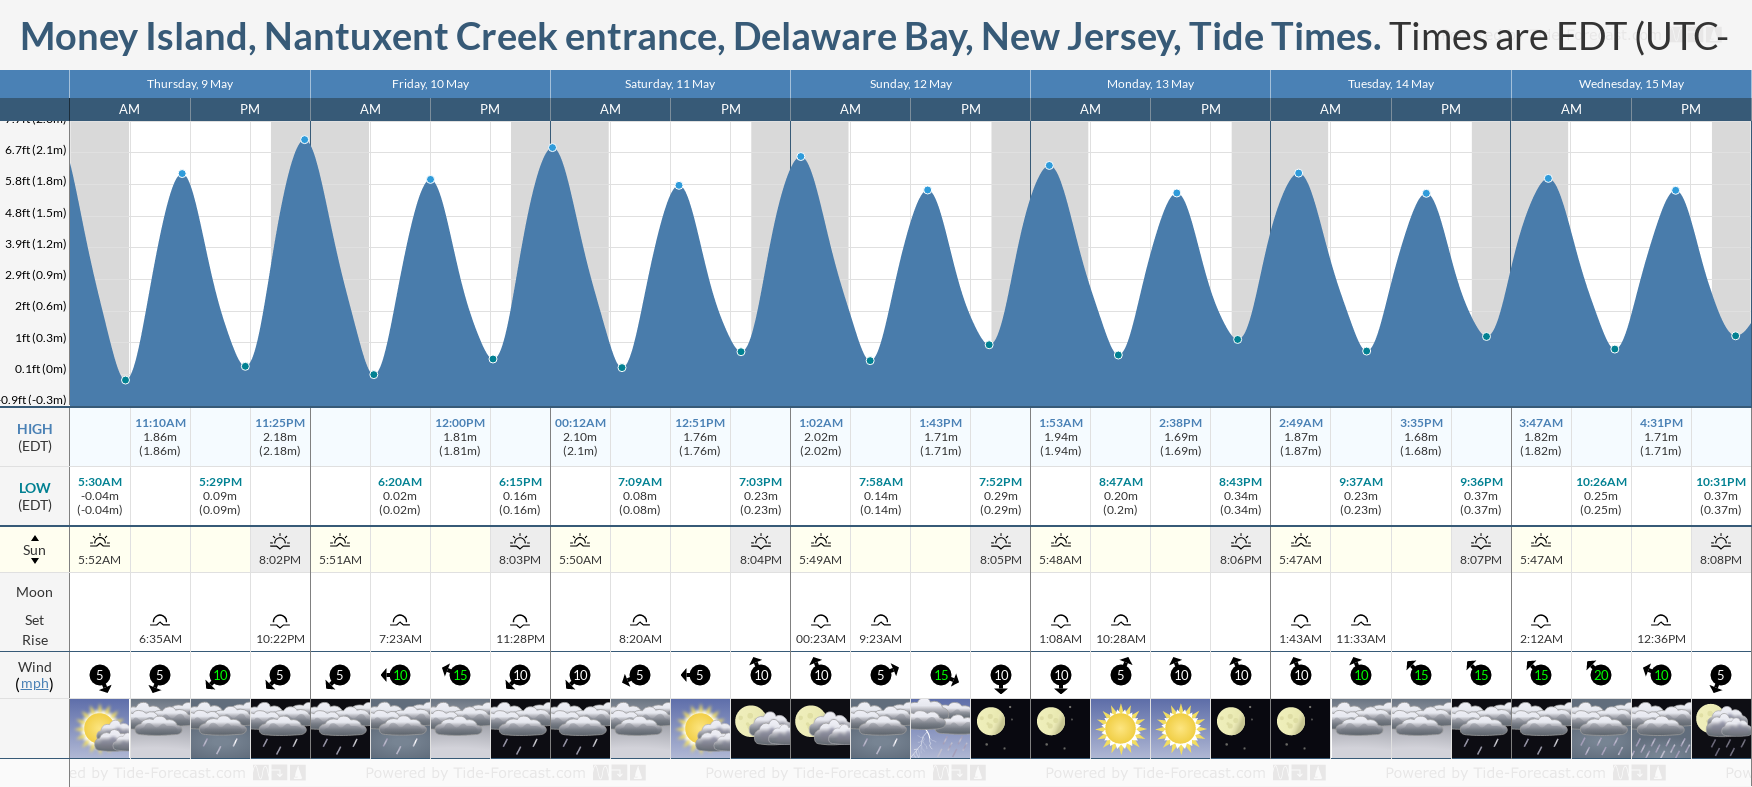 Money Island, Nantuxent Creek entrance, Delaware Bay, New Jersey Tide Chart including high and low tide tide times for the next 7 days